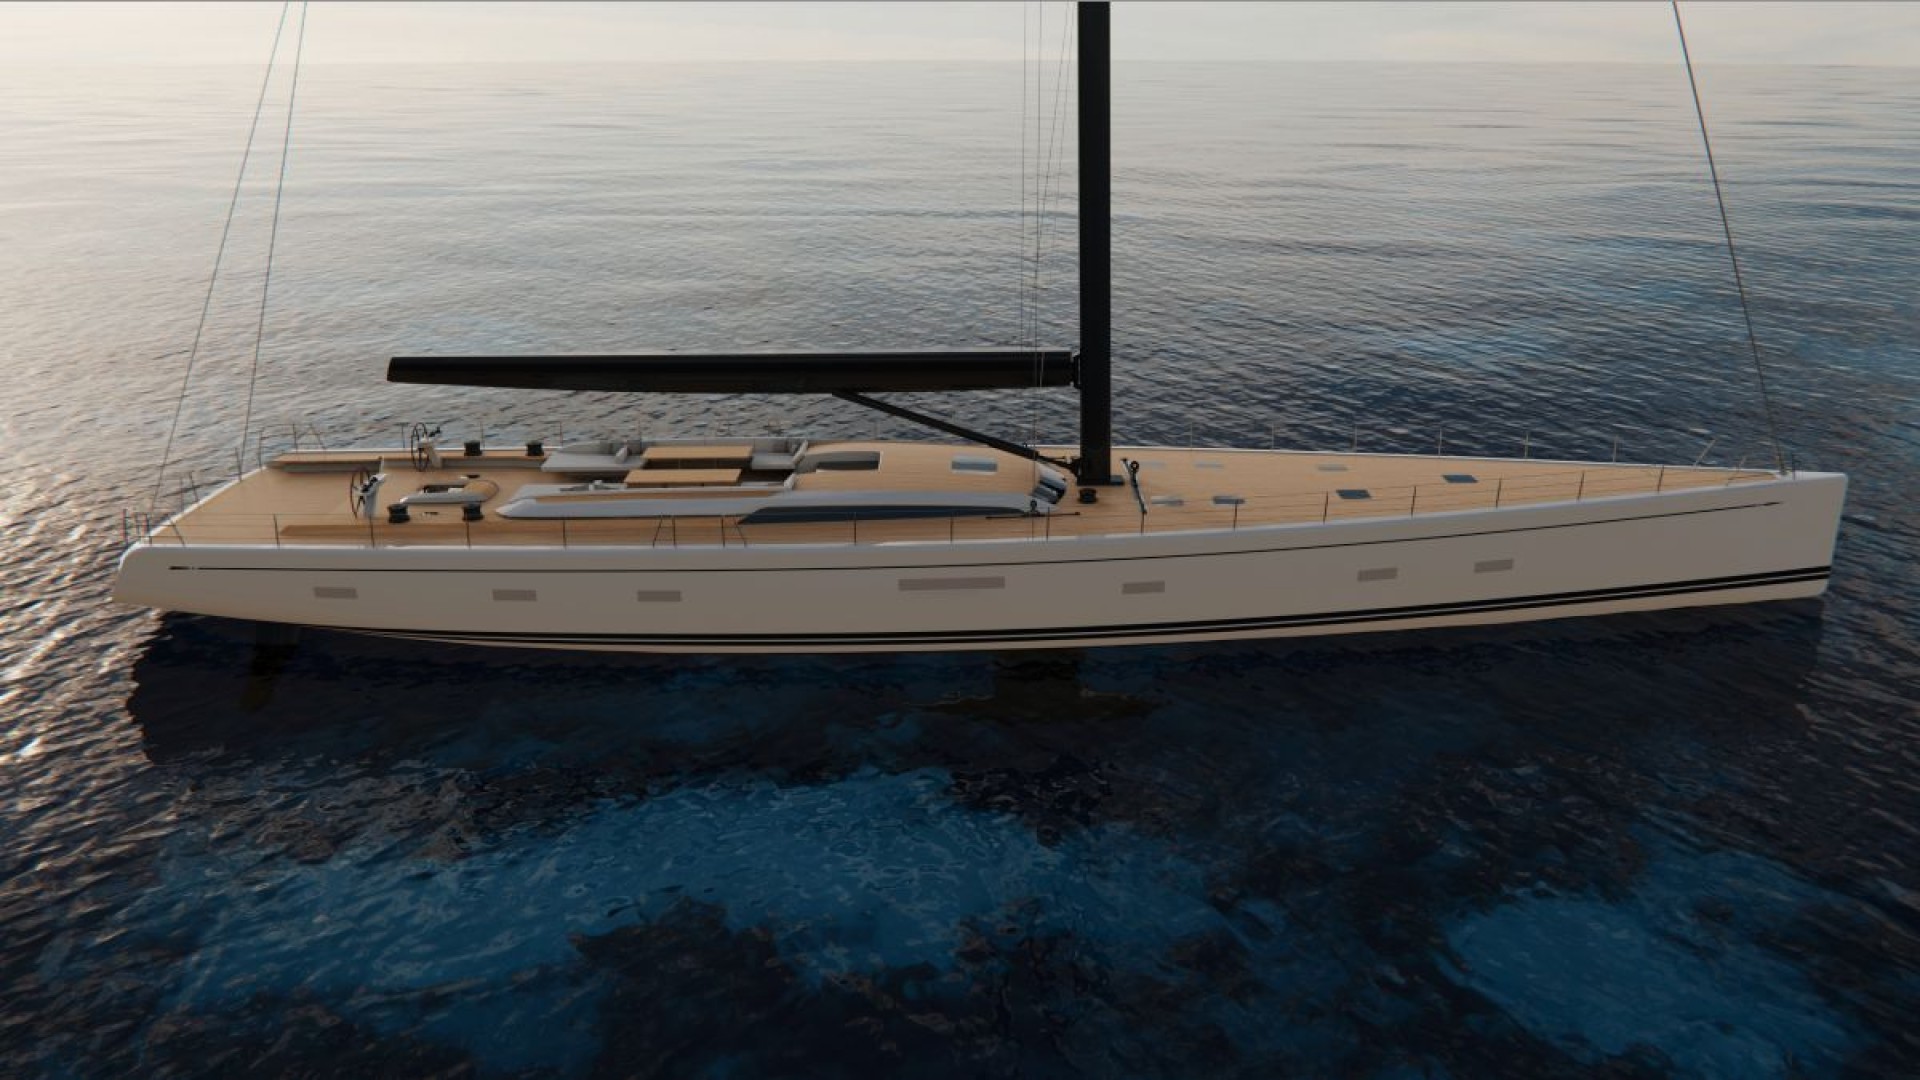 Nautor Swan is positioning itself in the Superyachts segment with a complete Range